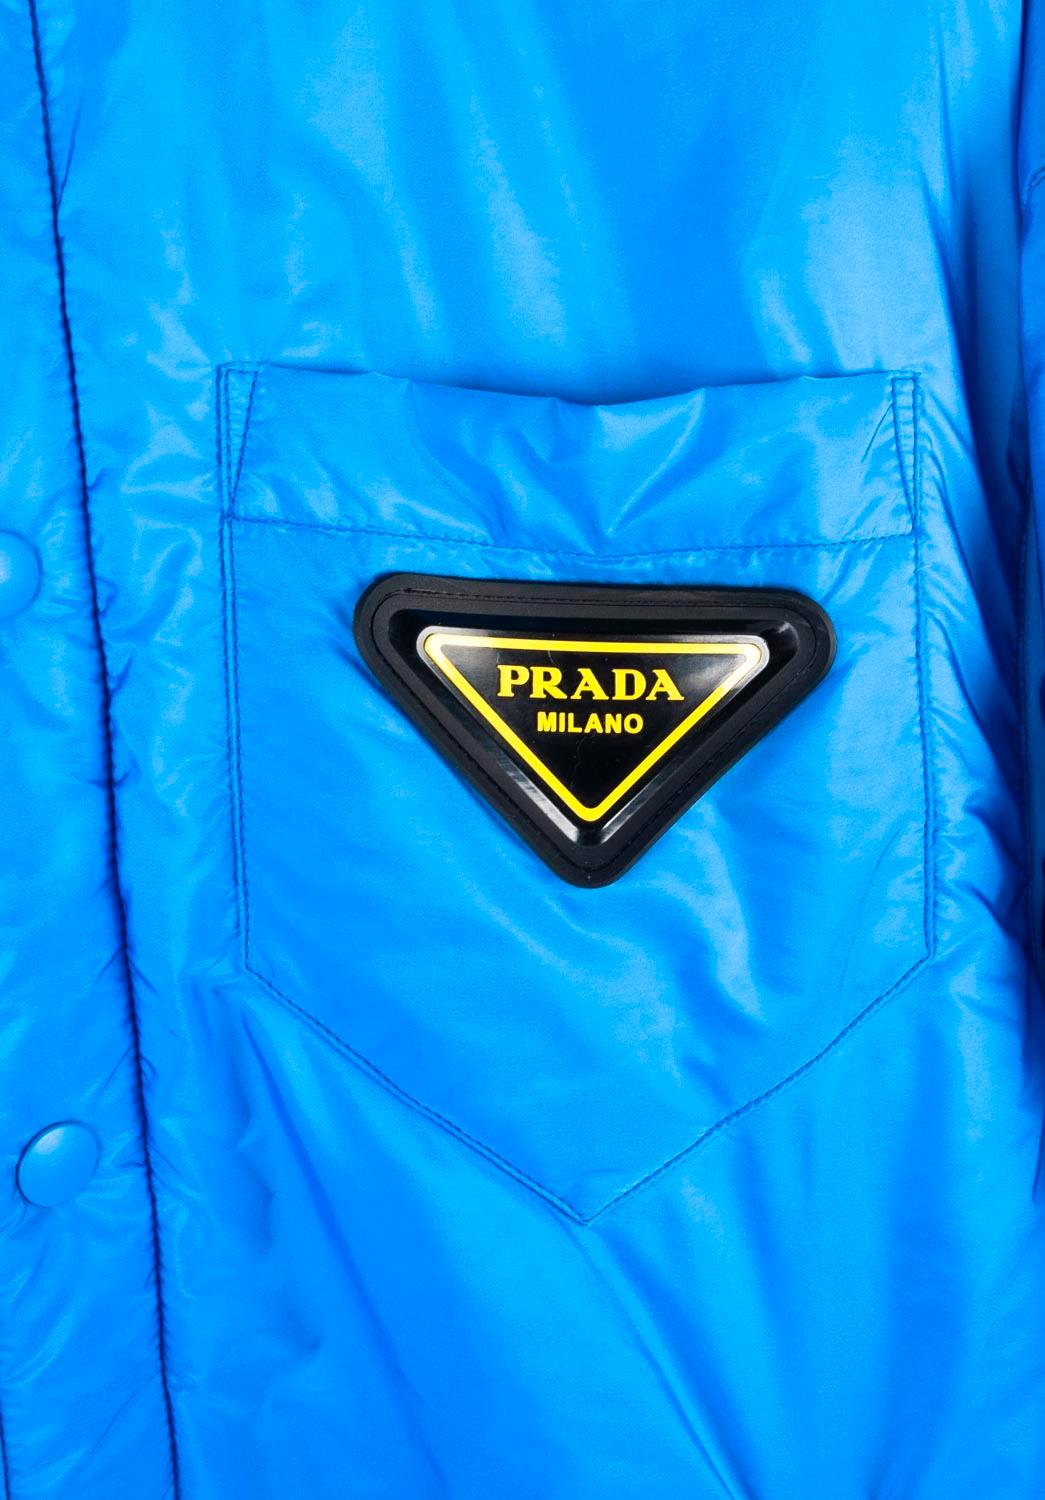 Prada Nylon blue jacket relaxed fit oversized Medium, S641  In Excellent Condition For Sale In Kaunas, LT